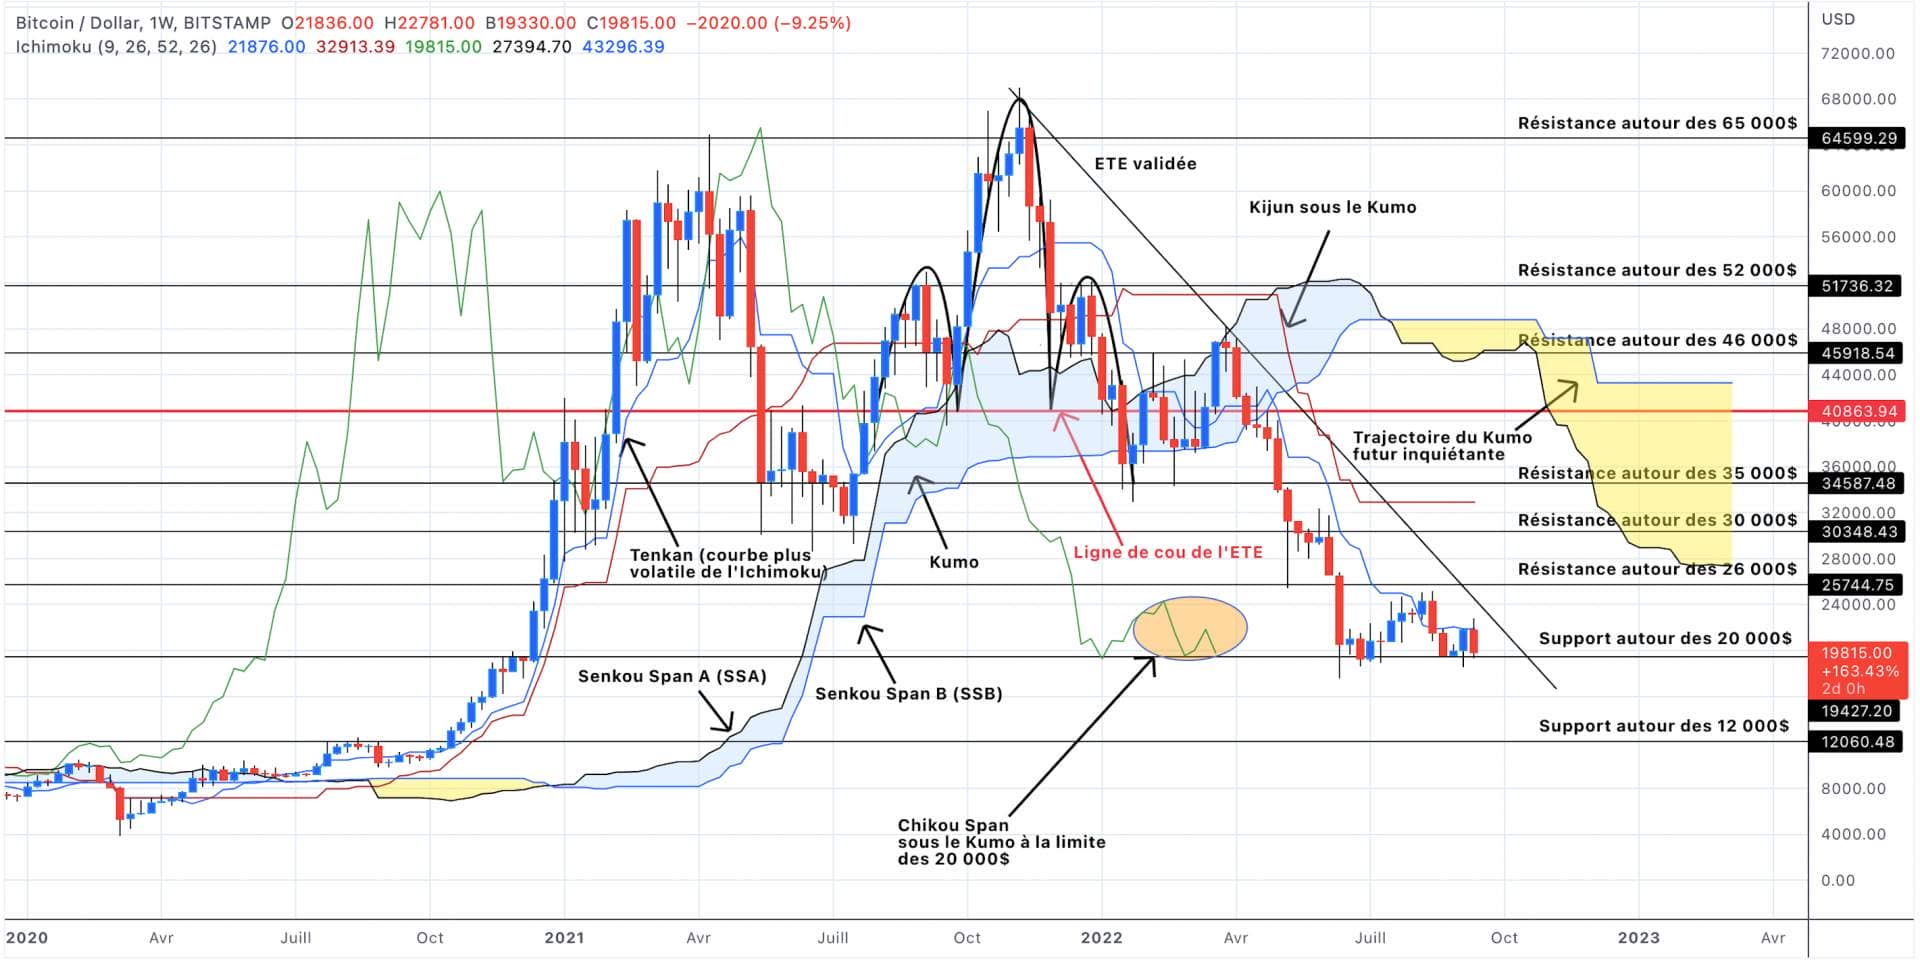 Bitcoin price analysis in weekly units - September 17, 2022